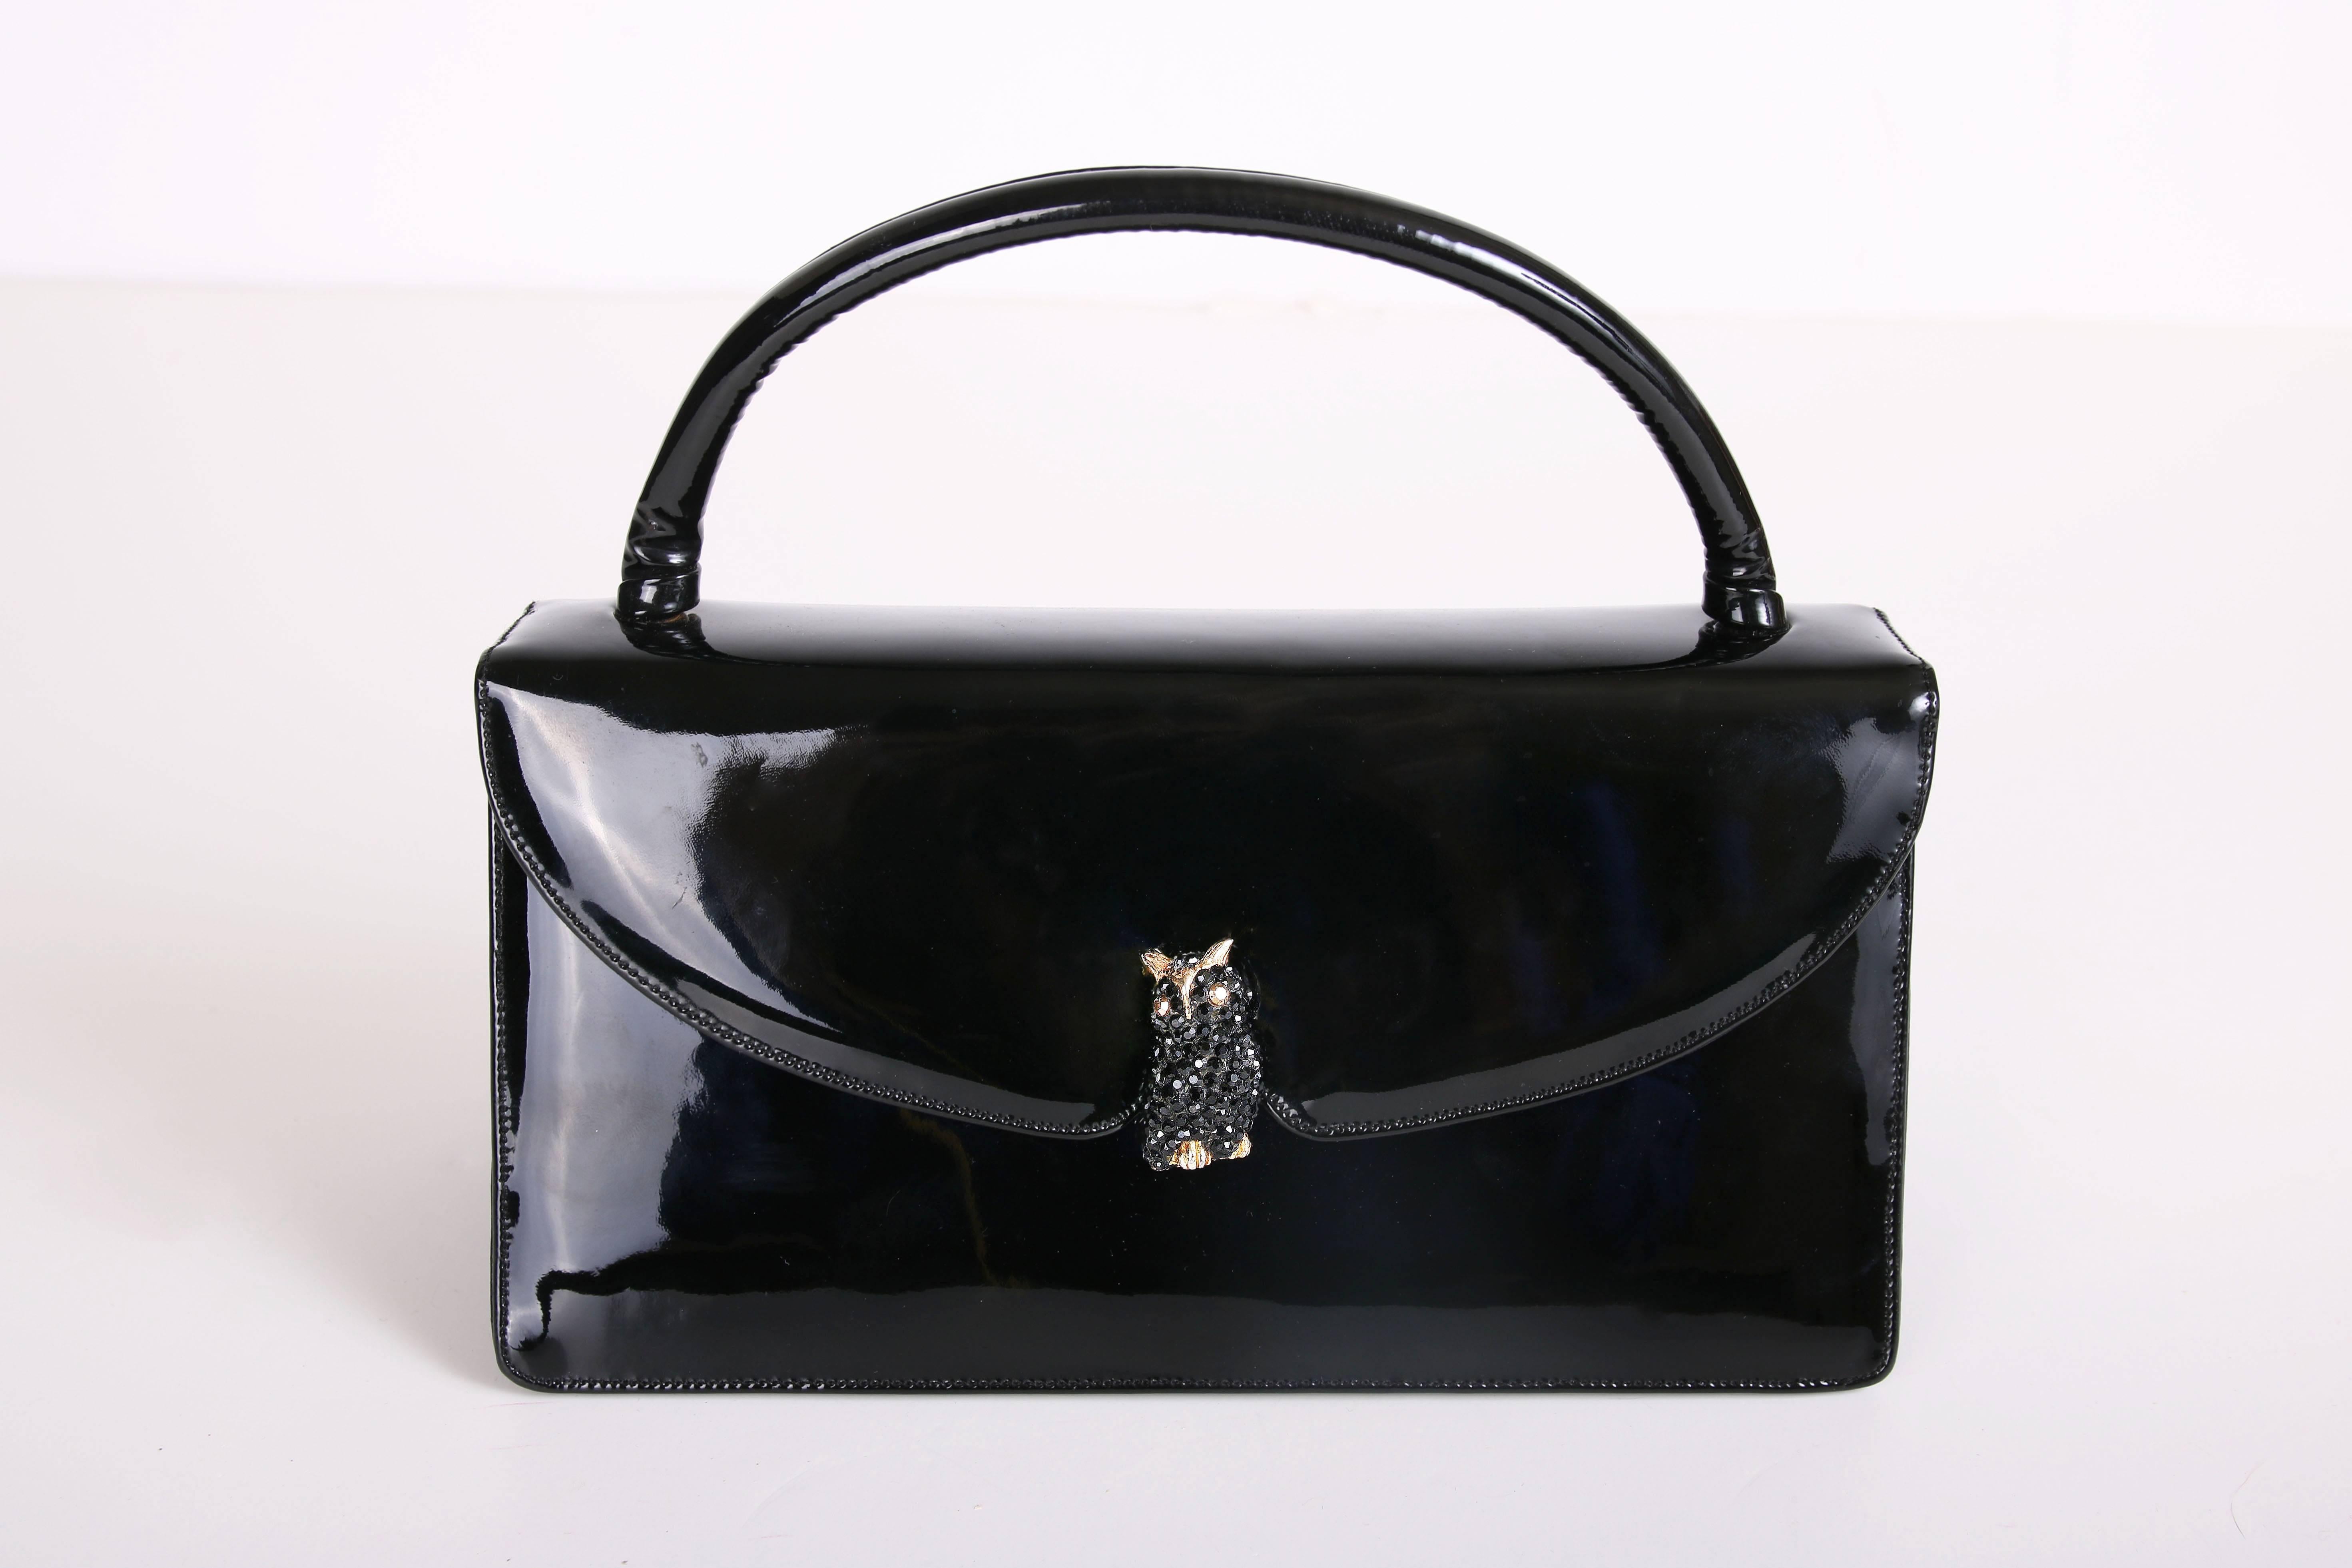 Vintage Judith Leiber black patent leather clutch handbag with gold-toned and black rhinestone owl detail at front closure. Interior has three separate compartments, one zipper pocket and one open pocket. Judith Leiber logo at interior. In excellent